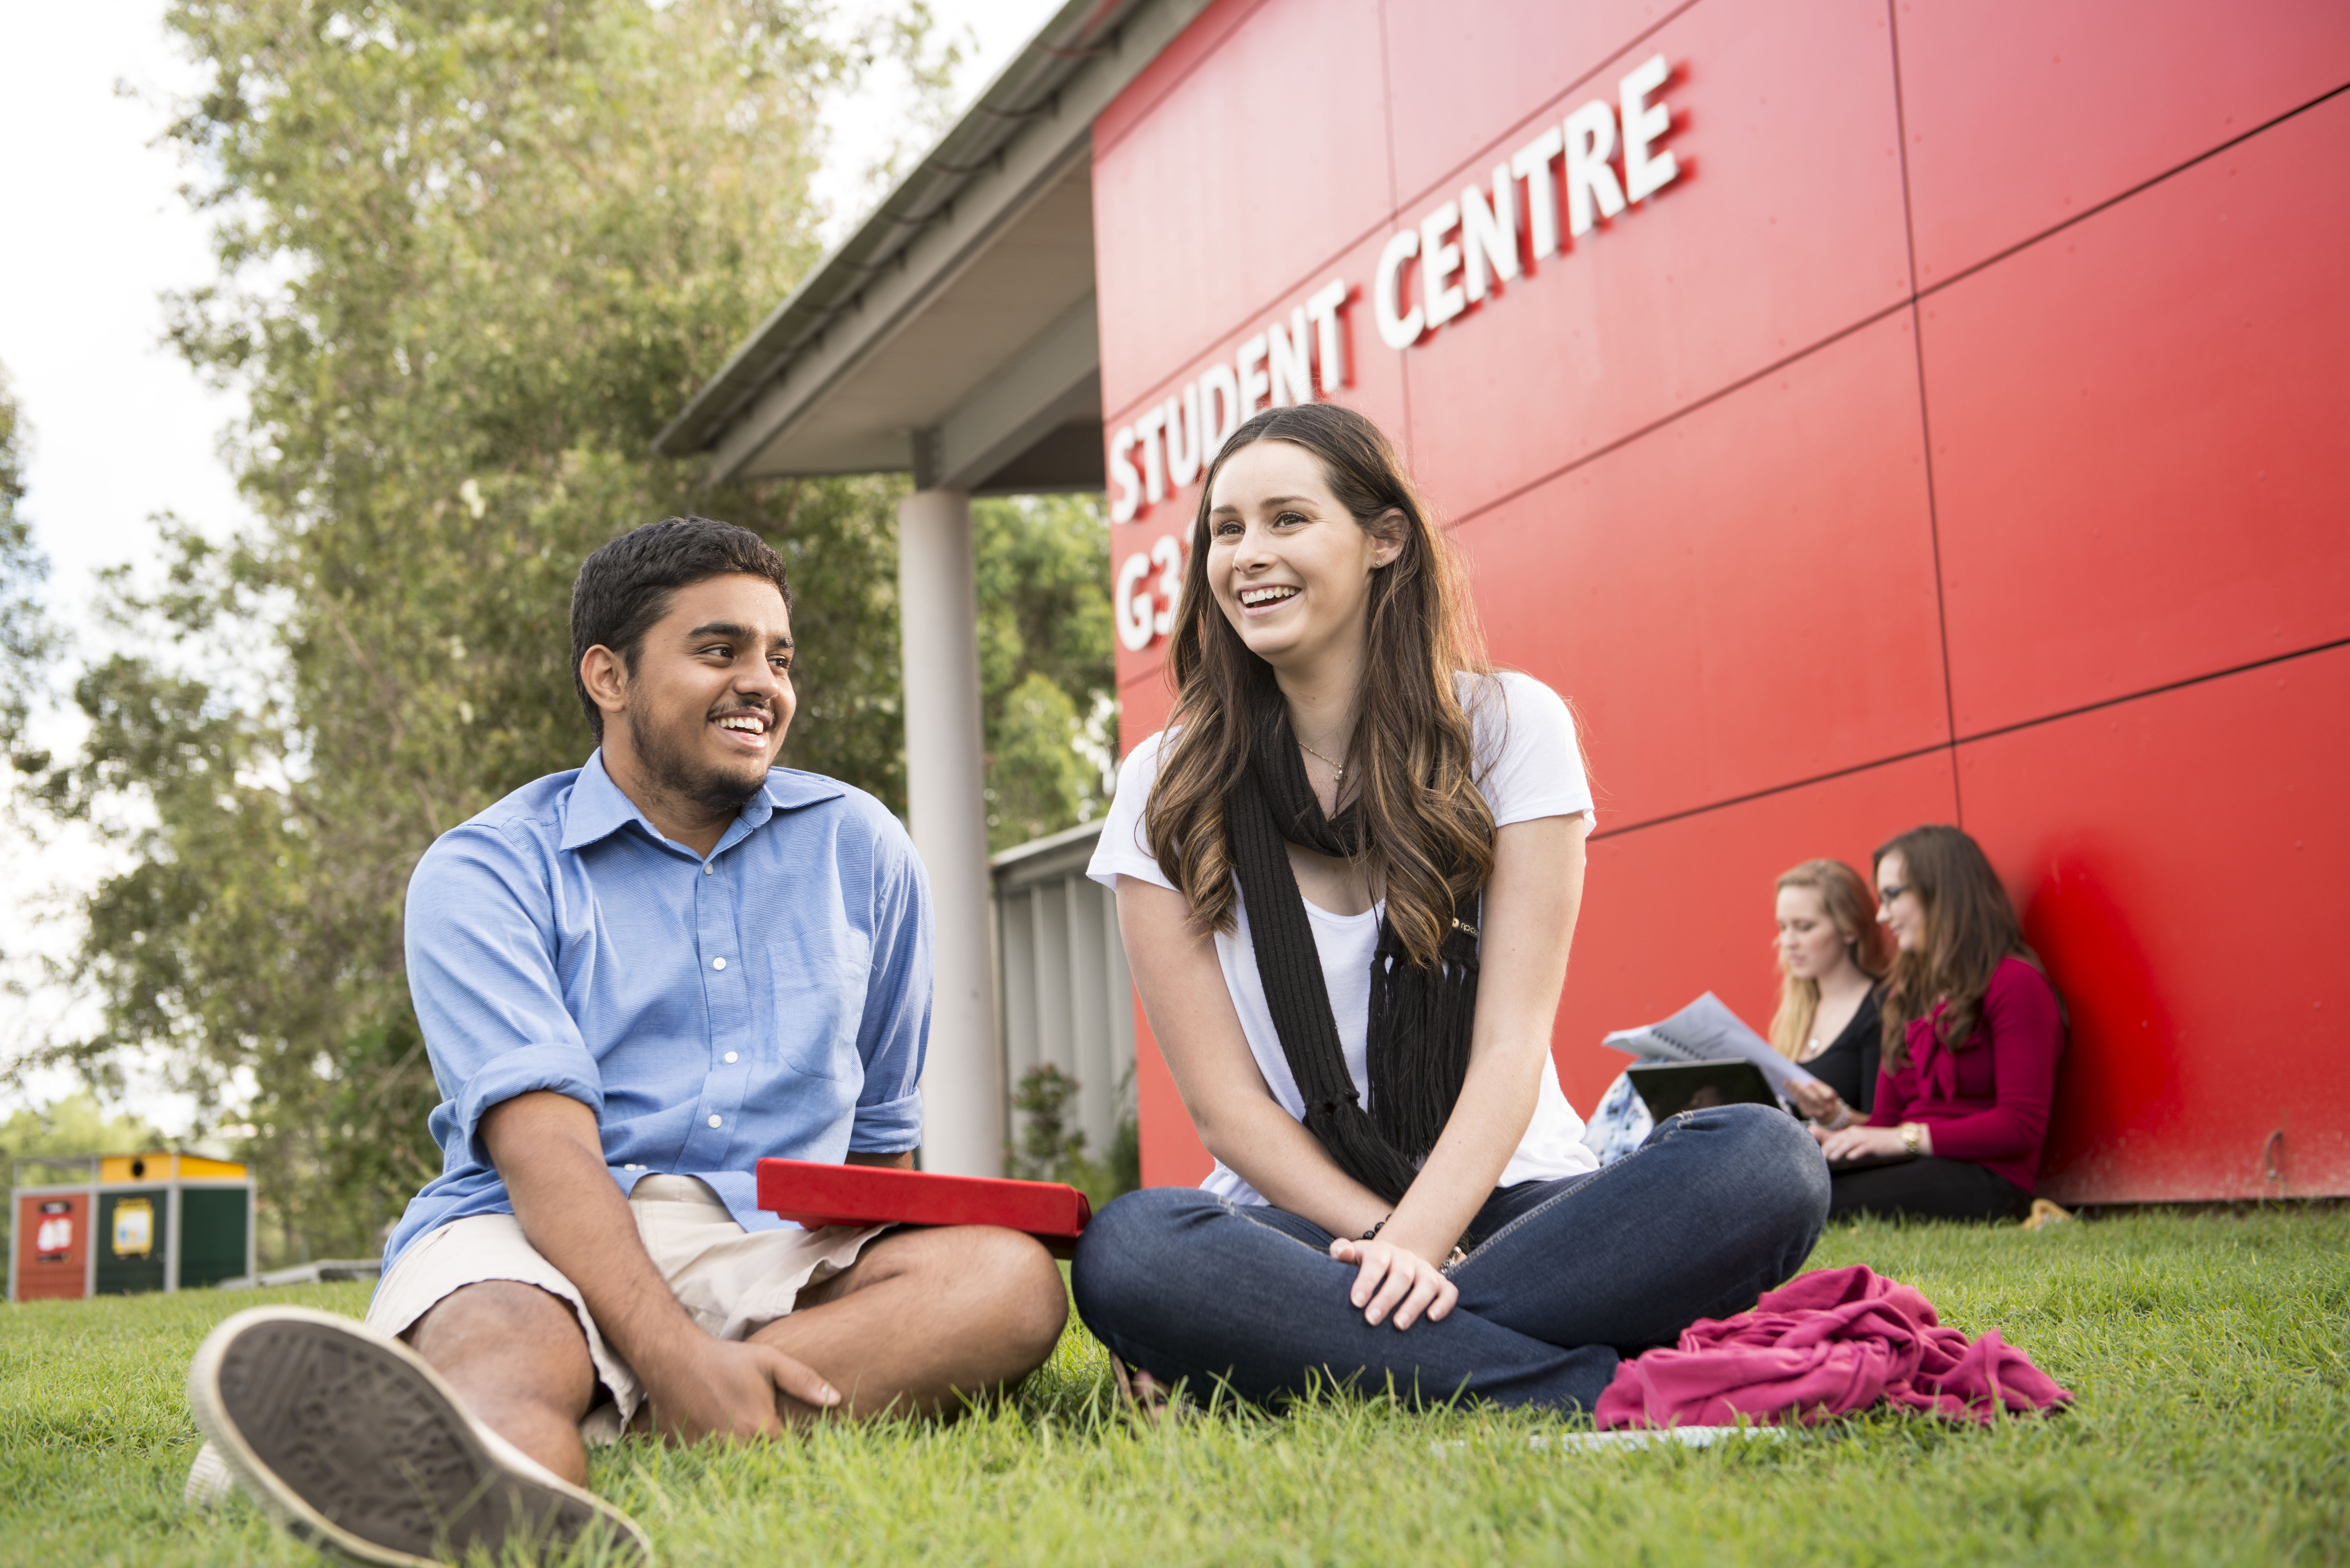 Students rank their educational experience at Griffith above the national average.